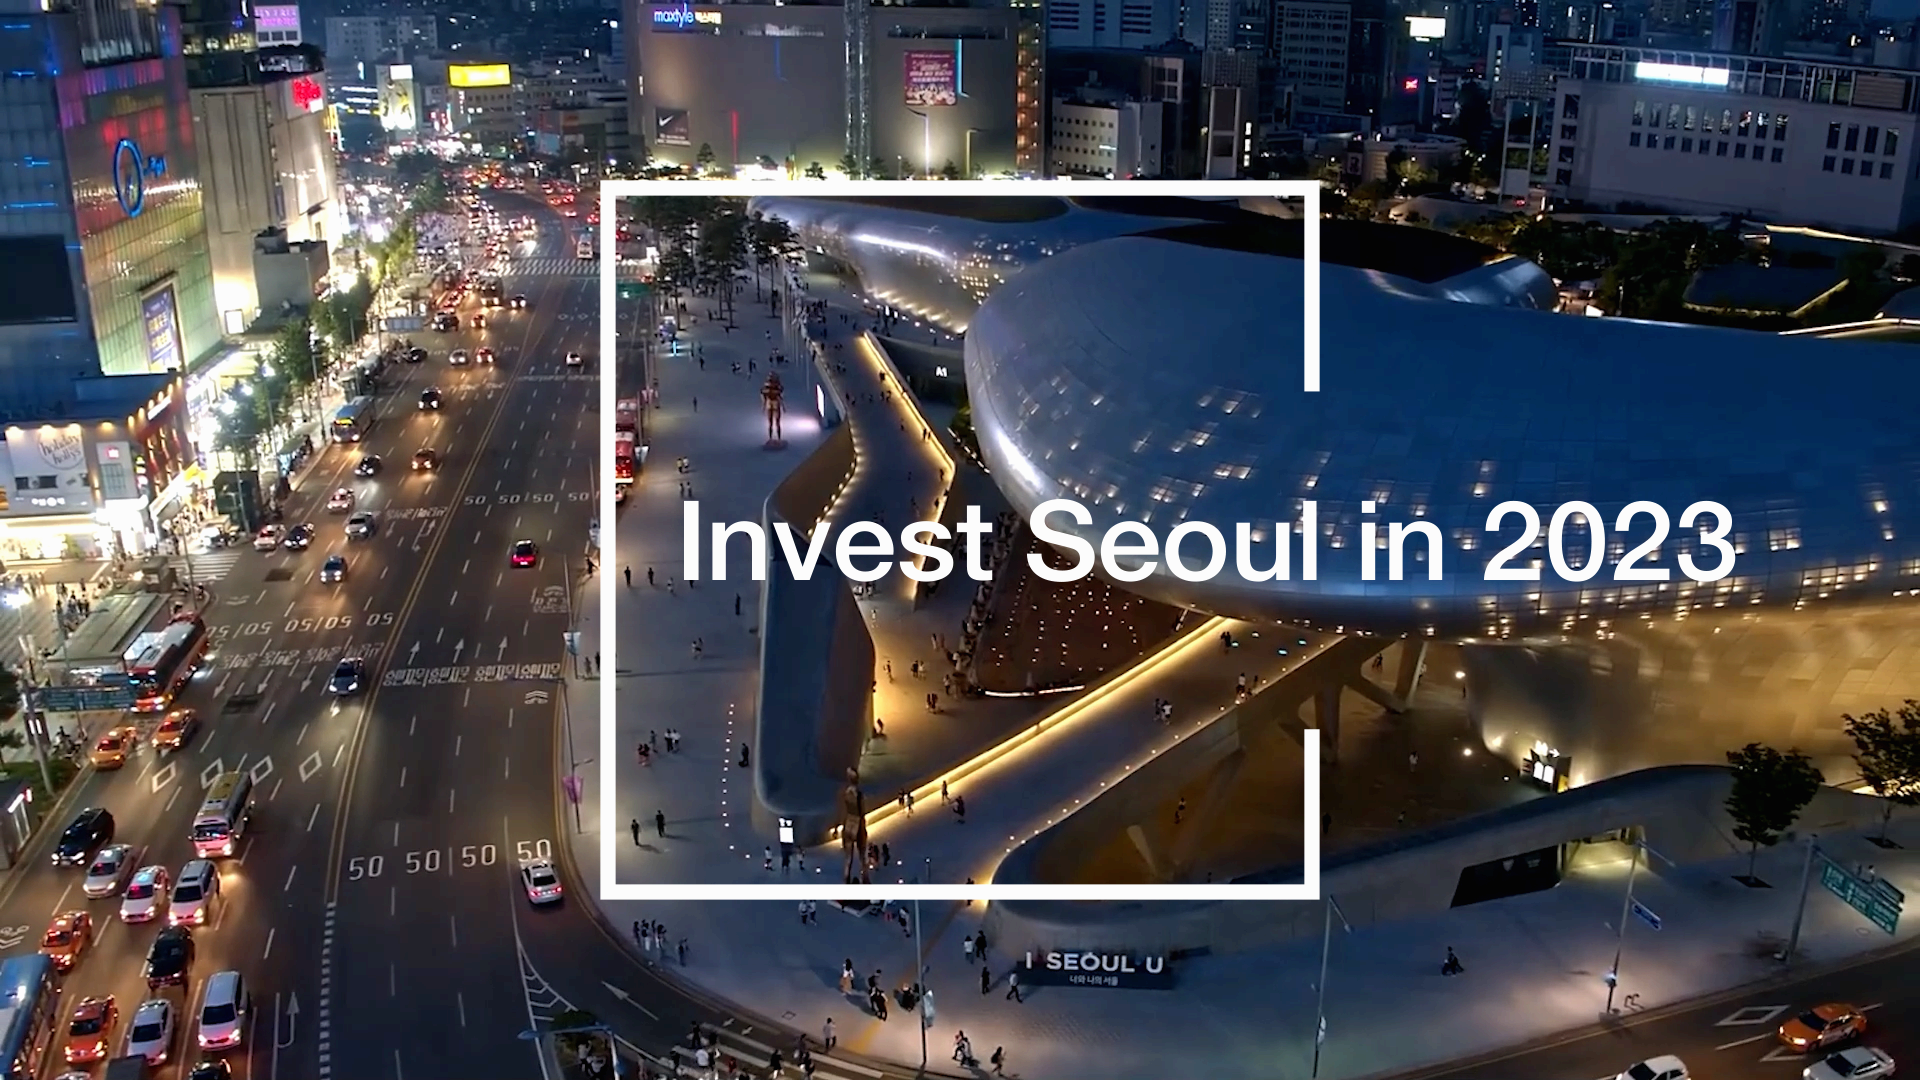 What Invest Seoul has done in 2023